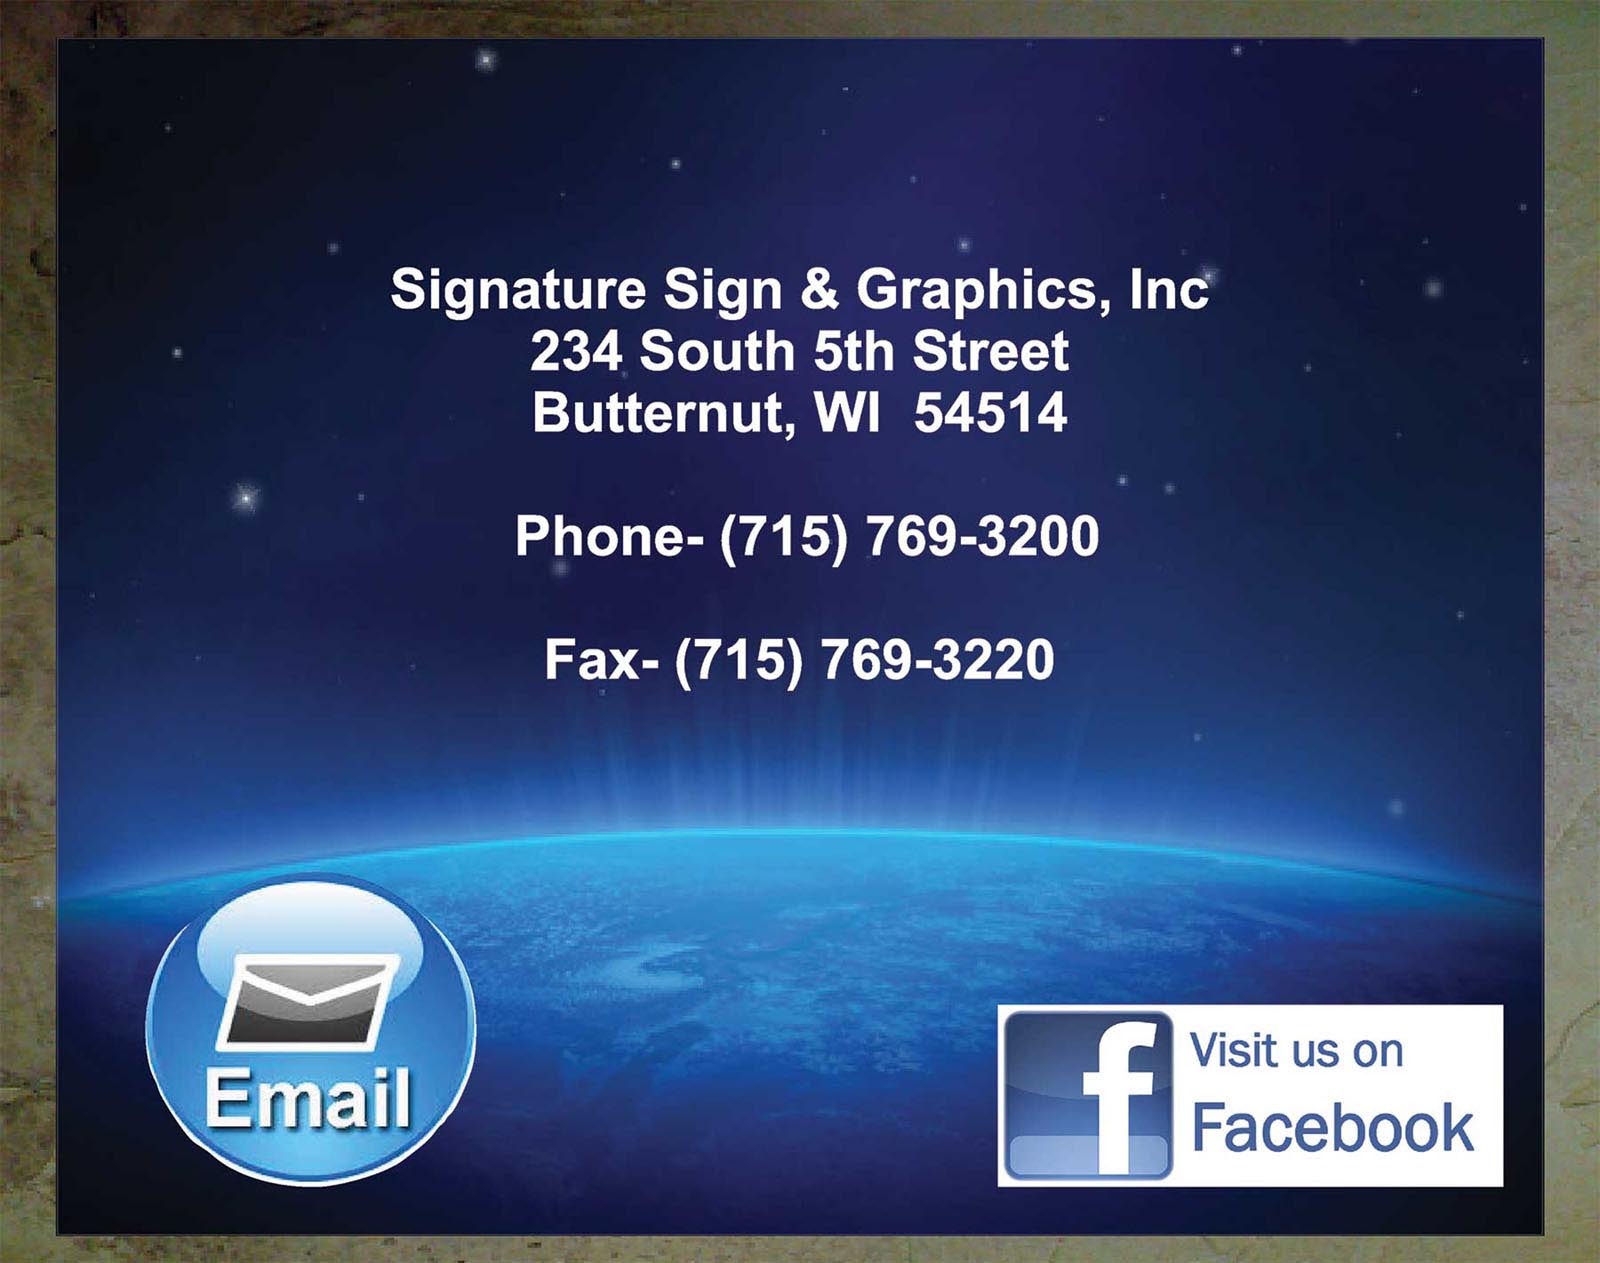 Contact Signature Sign & Graphics - 234 South 5th Street - Butternut, WI  54514